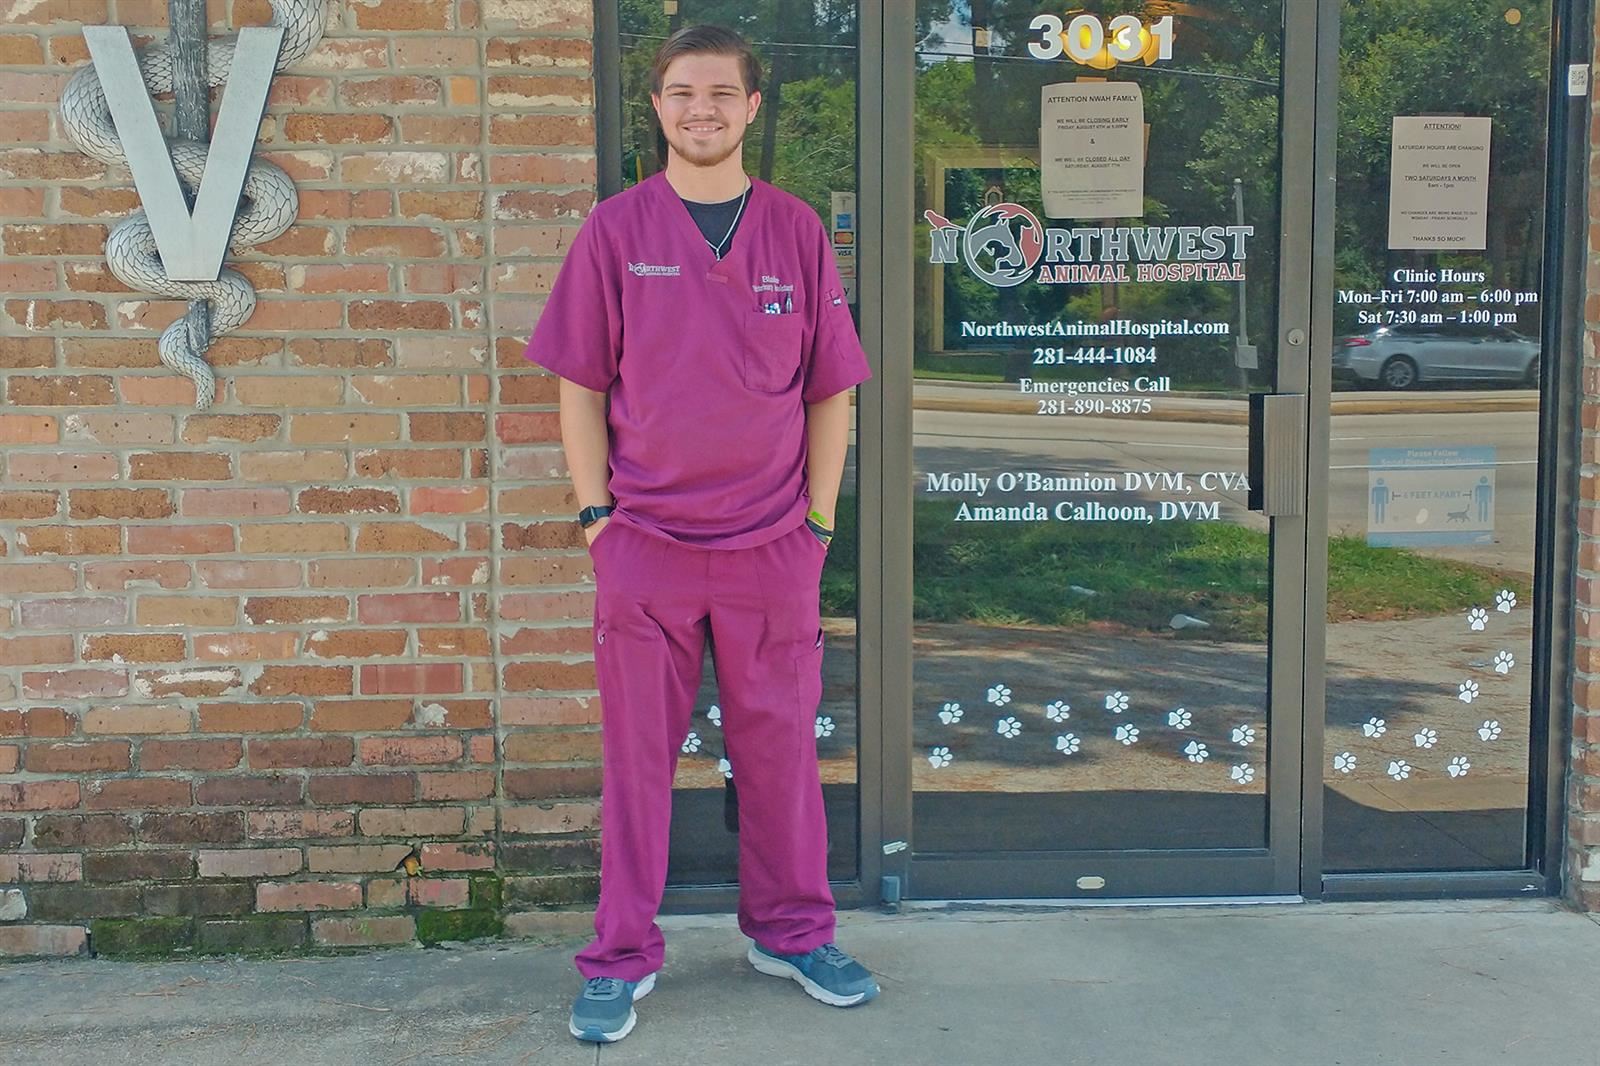 Cypress Creek High School graduate Blake Schmaeling worked at Lakewood Forest Veterinary Hospital under Dr. Sylvia Borland.